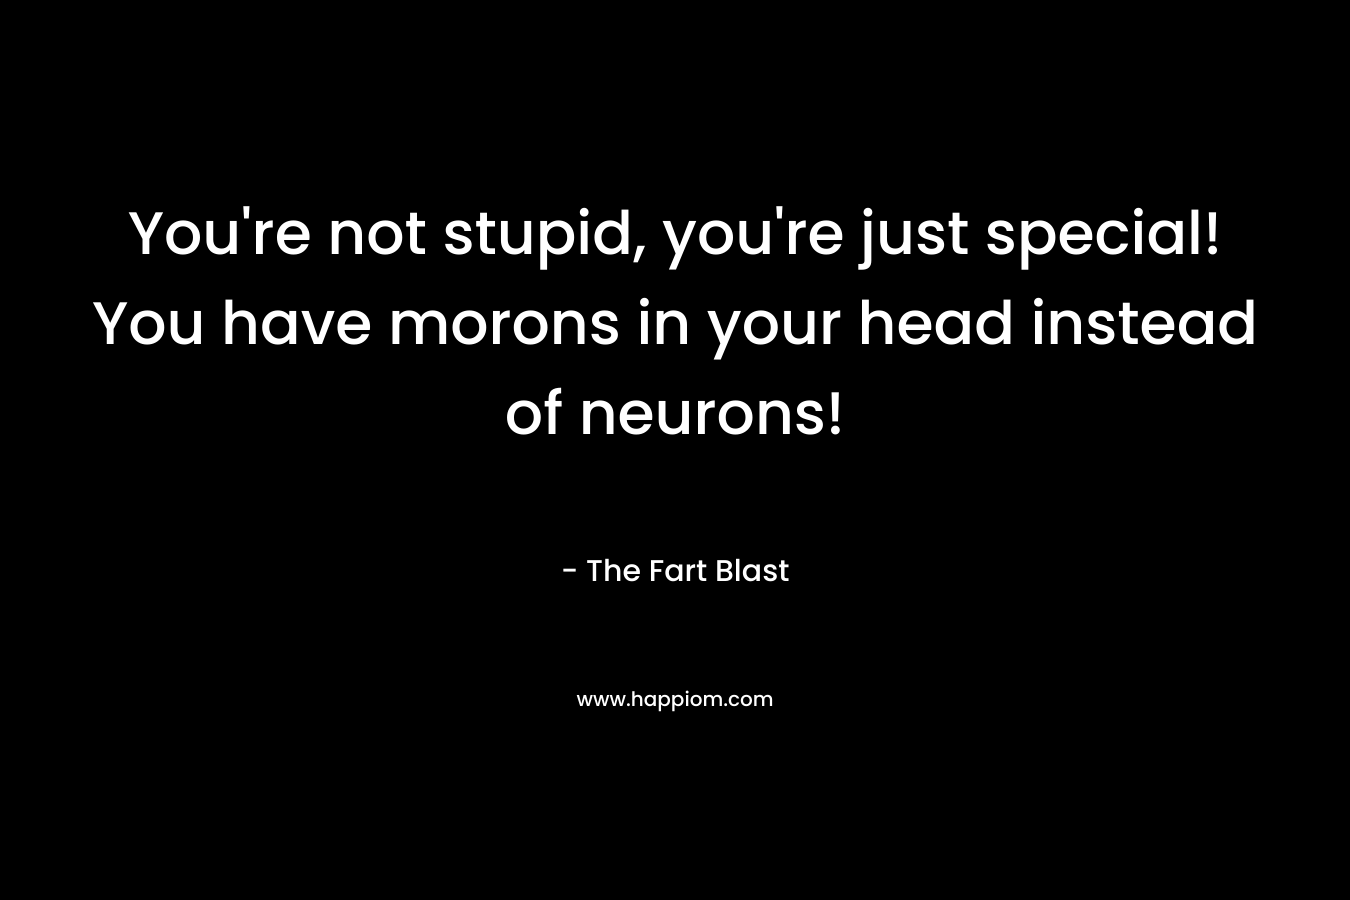 You’re not stupid, you’re just special! You have morons in your head instead of neurons! – The Fart Blast